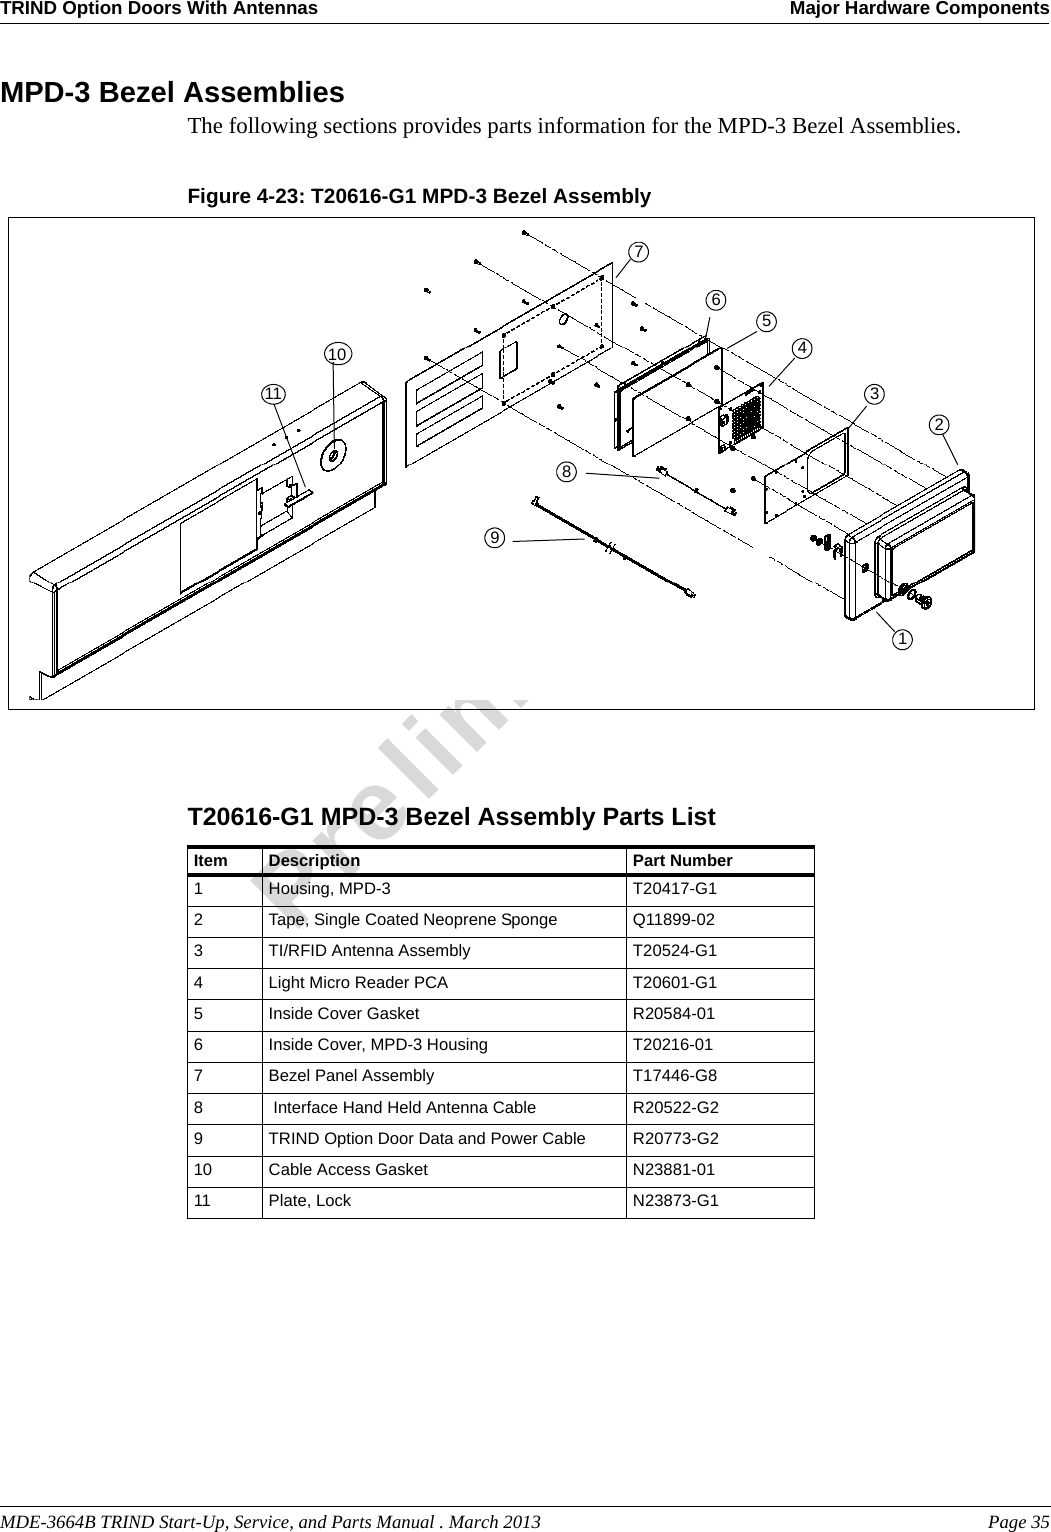 MDE-3664B TRIND Start-Up, Service, and Parts Manual . March 2013 Page 35TRIND Option Doors With Antennas Major Hardware ComponentsPreliminaryMPD-3 Bezel AssembliesThe following sections provides parts information for the MPD-3 Bezel Assemblies.Figure 4-23: T20616-G1 MPD-3 Bezel Assembly7510116431892 T20616-G1 MPD-3 Bezel Assembly Parts List Item Description Part Number1Housing, MPD-3 T20417-G12Tape, Single Coated Neoprene Sponge Q11899-023TI/RFID Antenna Assembly T20524-G14Light Micro Reader PCA T20601-G15Inside Cover Gasket R20584-016Inside Cover, MPD-3 Housing T20216-017Bezel Panel Assembly T17446-G88 Interface Hand Held Antenna Cable R20522-G29TRIND Option Door Data and Power Cable R20773-G210 Cable Access Gasket N23881-0111 Plate, Lock N23873-G1